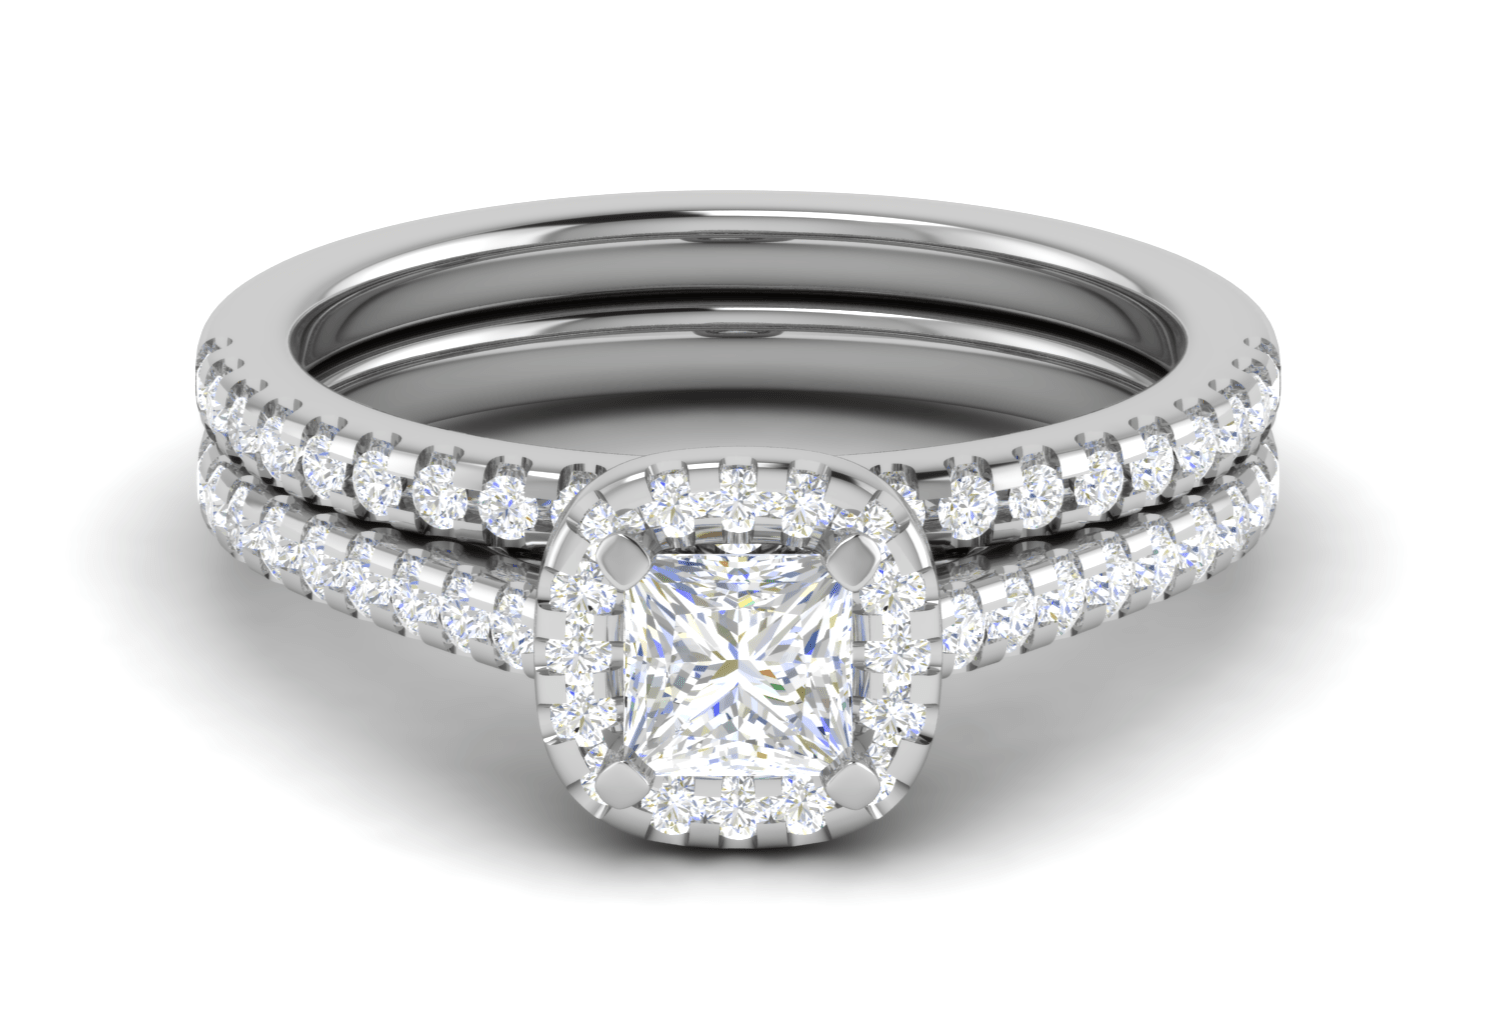 Oval Double Halo Engagement Rings | Wedding Bands & Co.